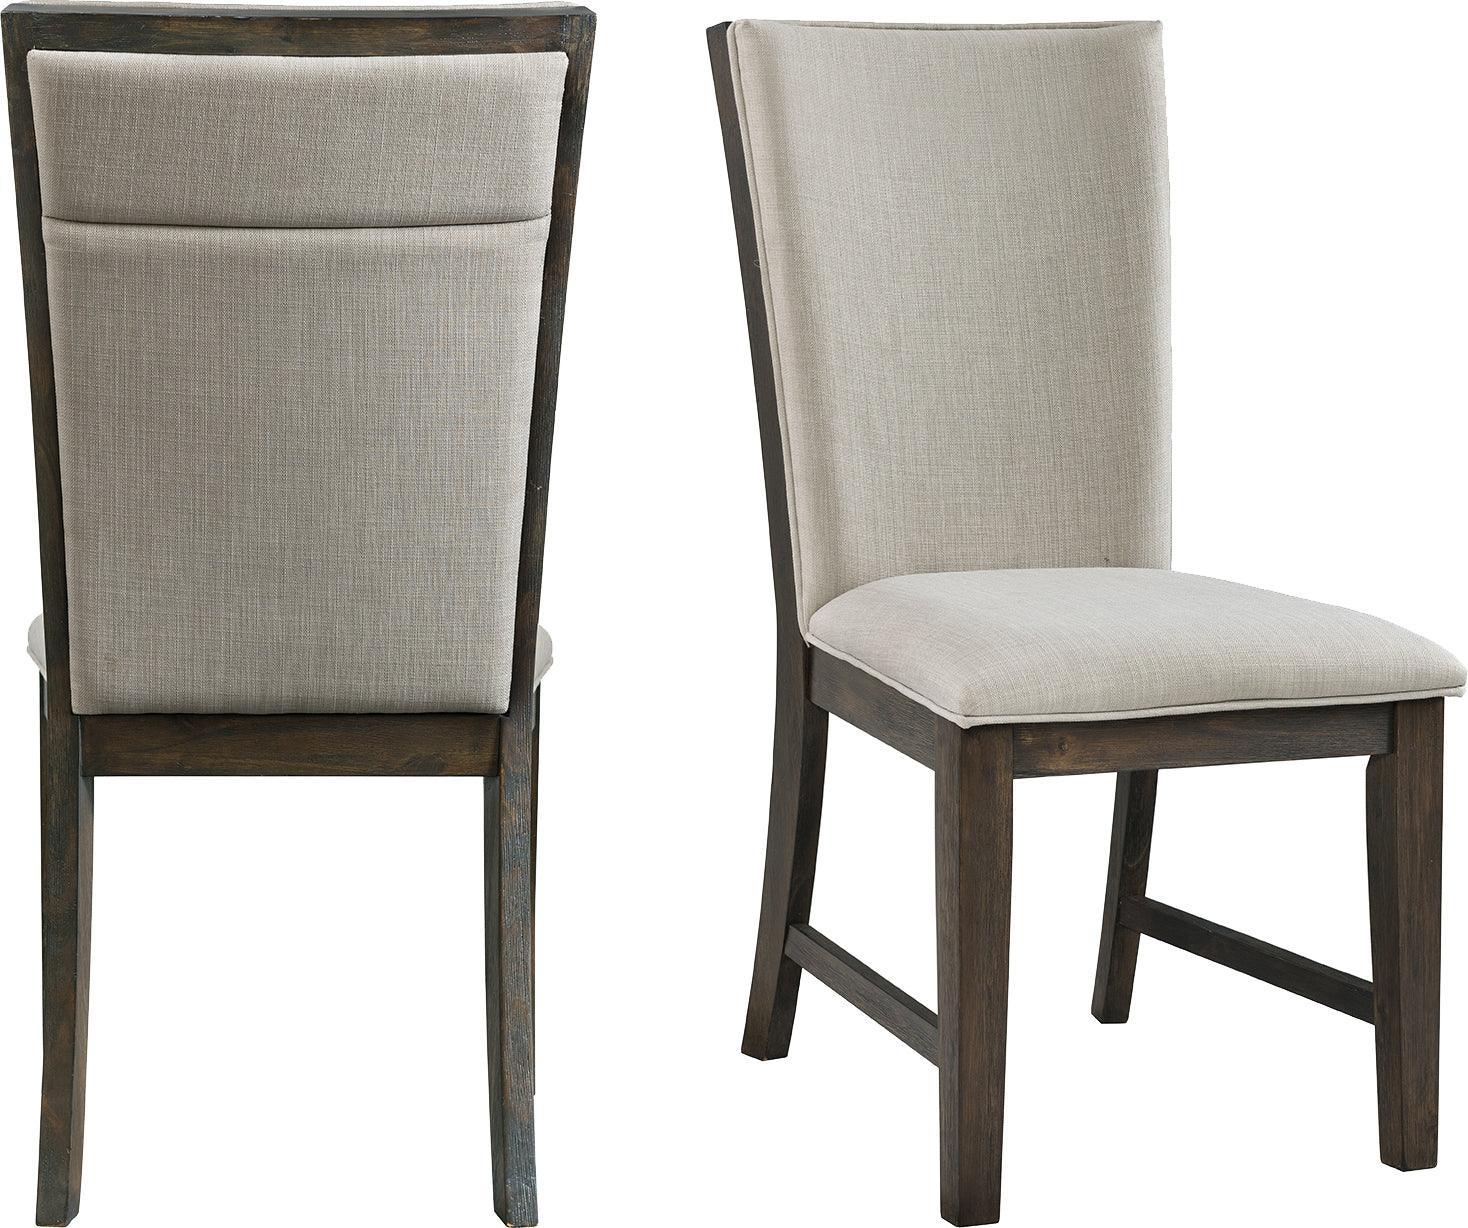 Elements Dining Chairs - Jasper Upholstered Side Chair Set (Set of 2)